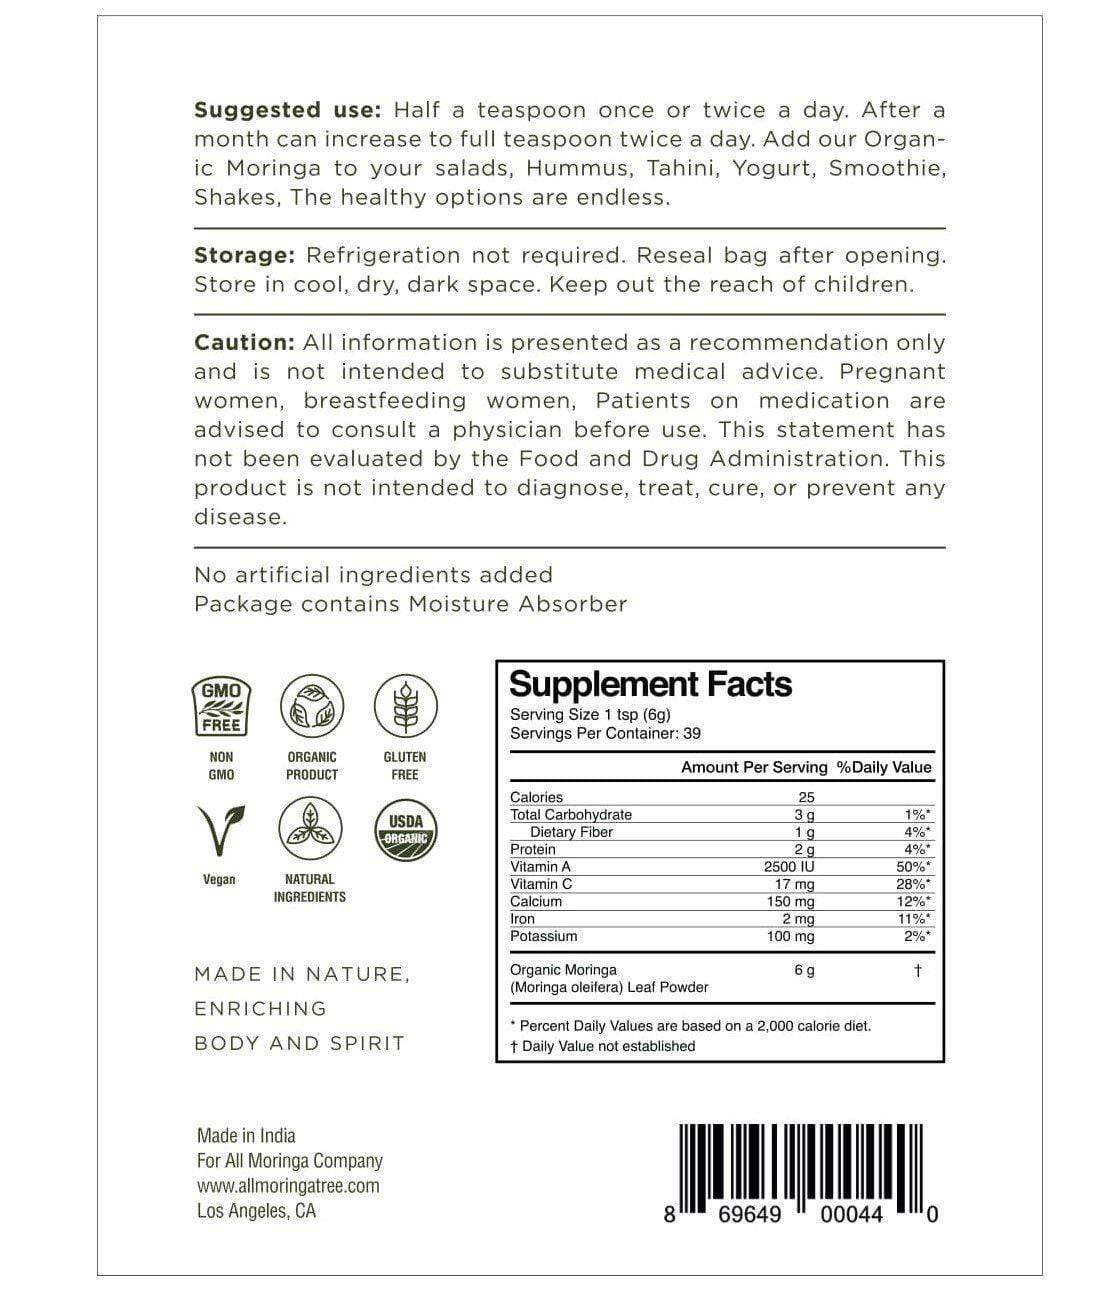 Organic moringa leaves powder label back product description supplement facts and barcode